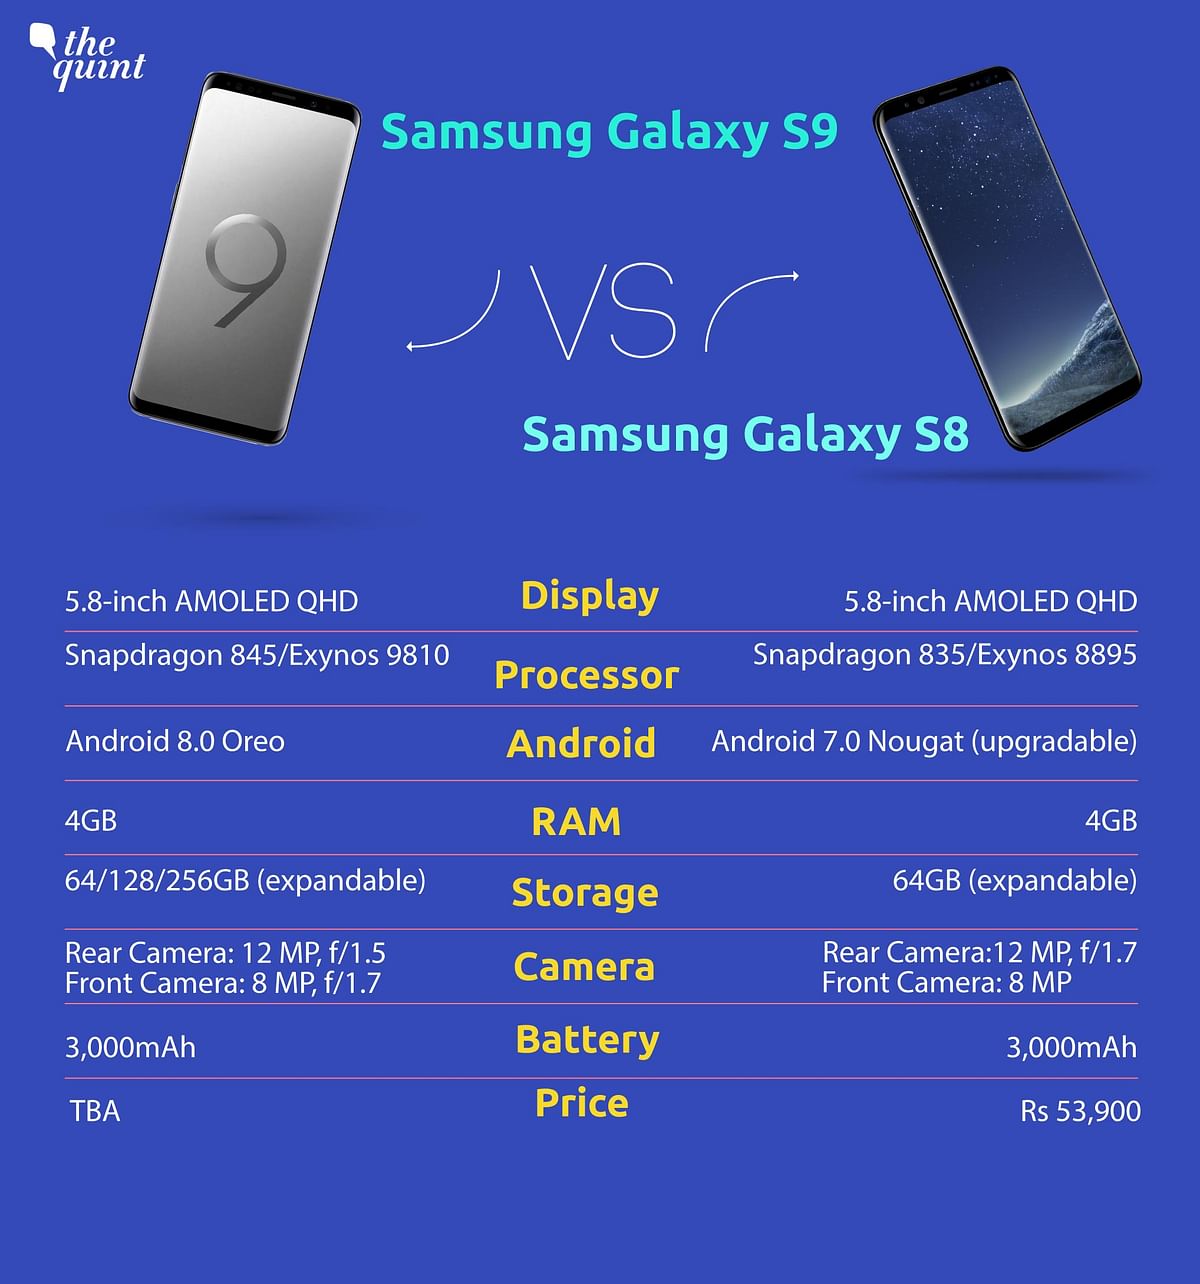 Samsung has just launched its latest flagship the S9 and we pit it against the Galaxy S8 in a specs to specs battle.